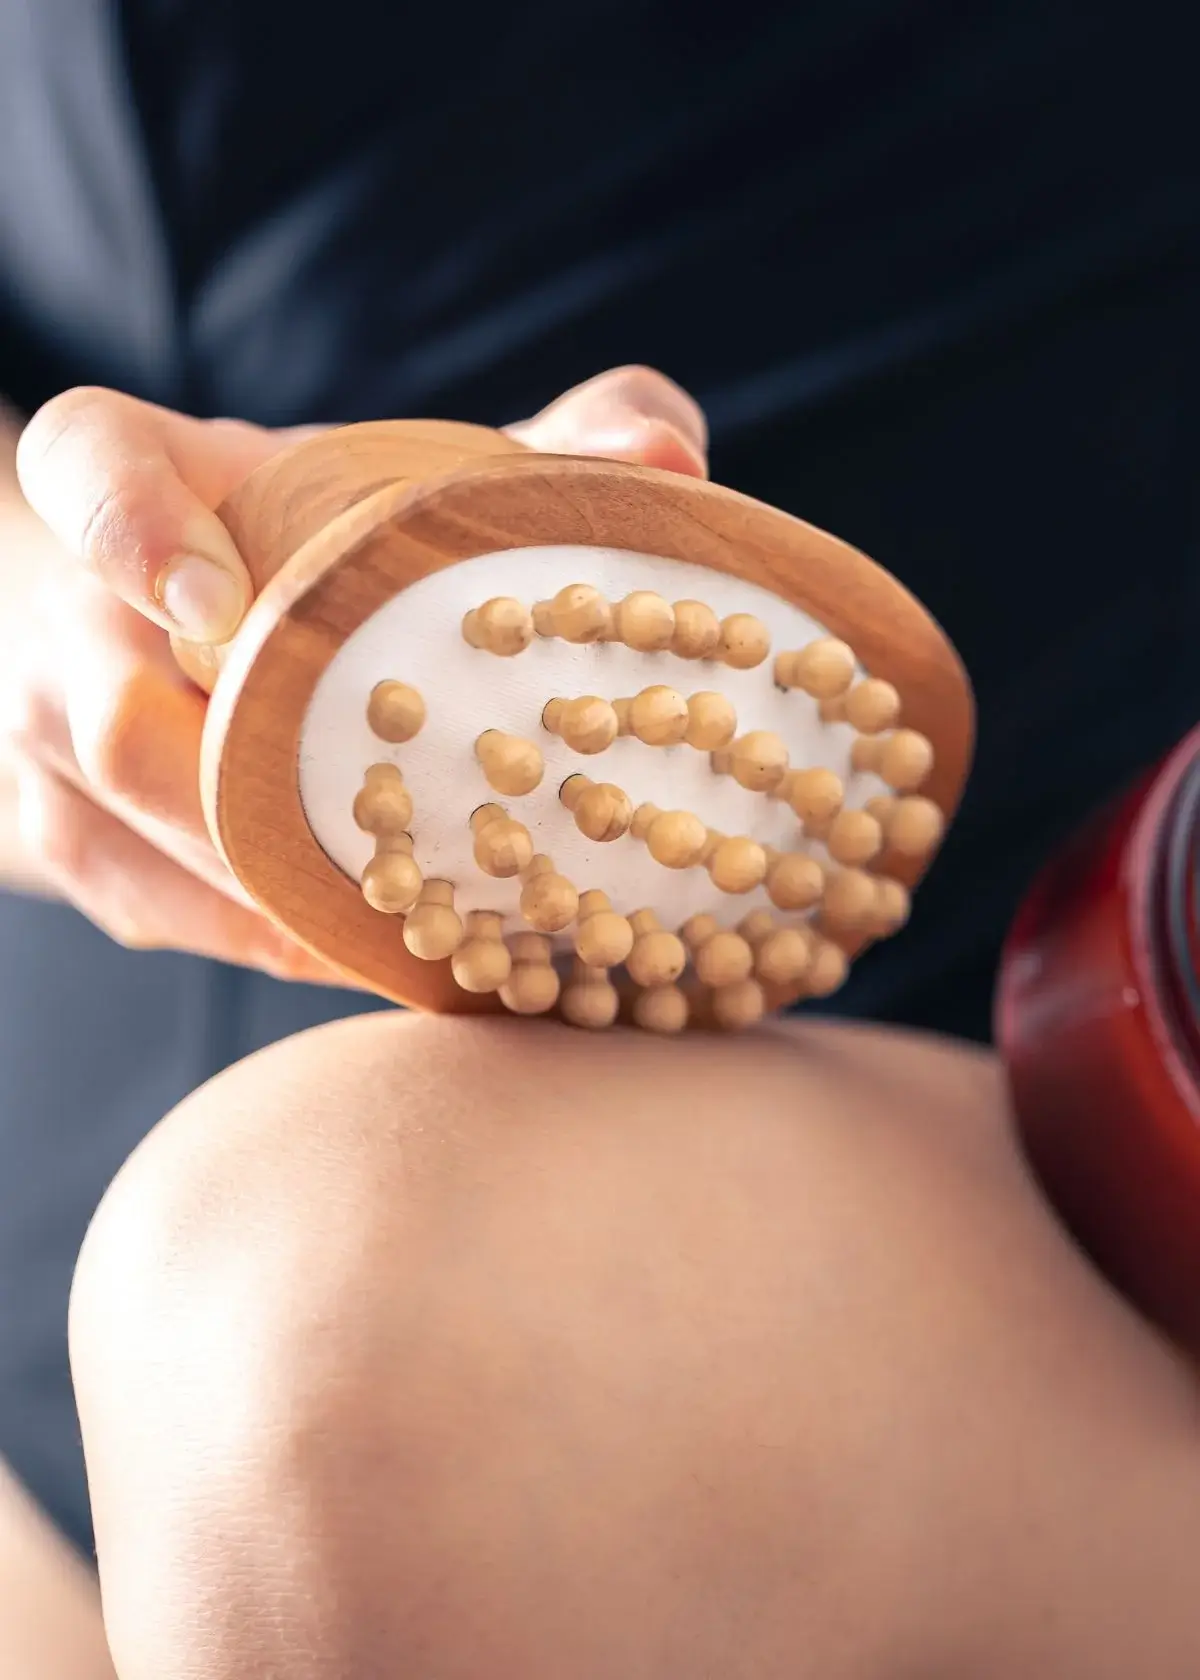 How does a cellulite massager work?